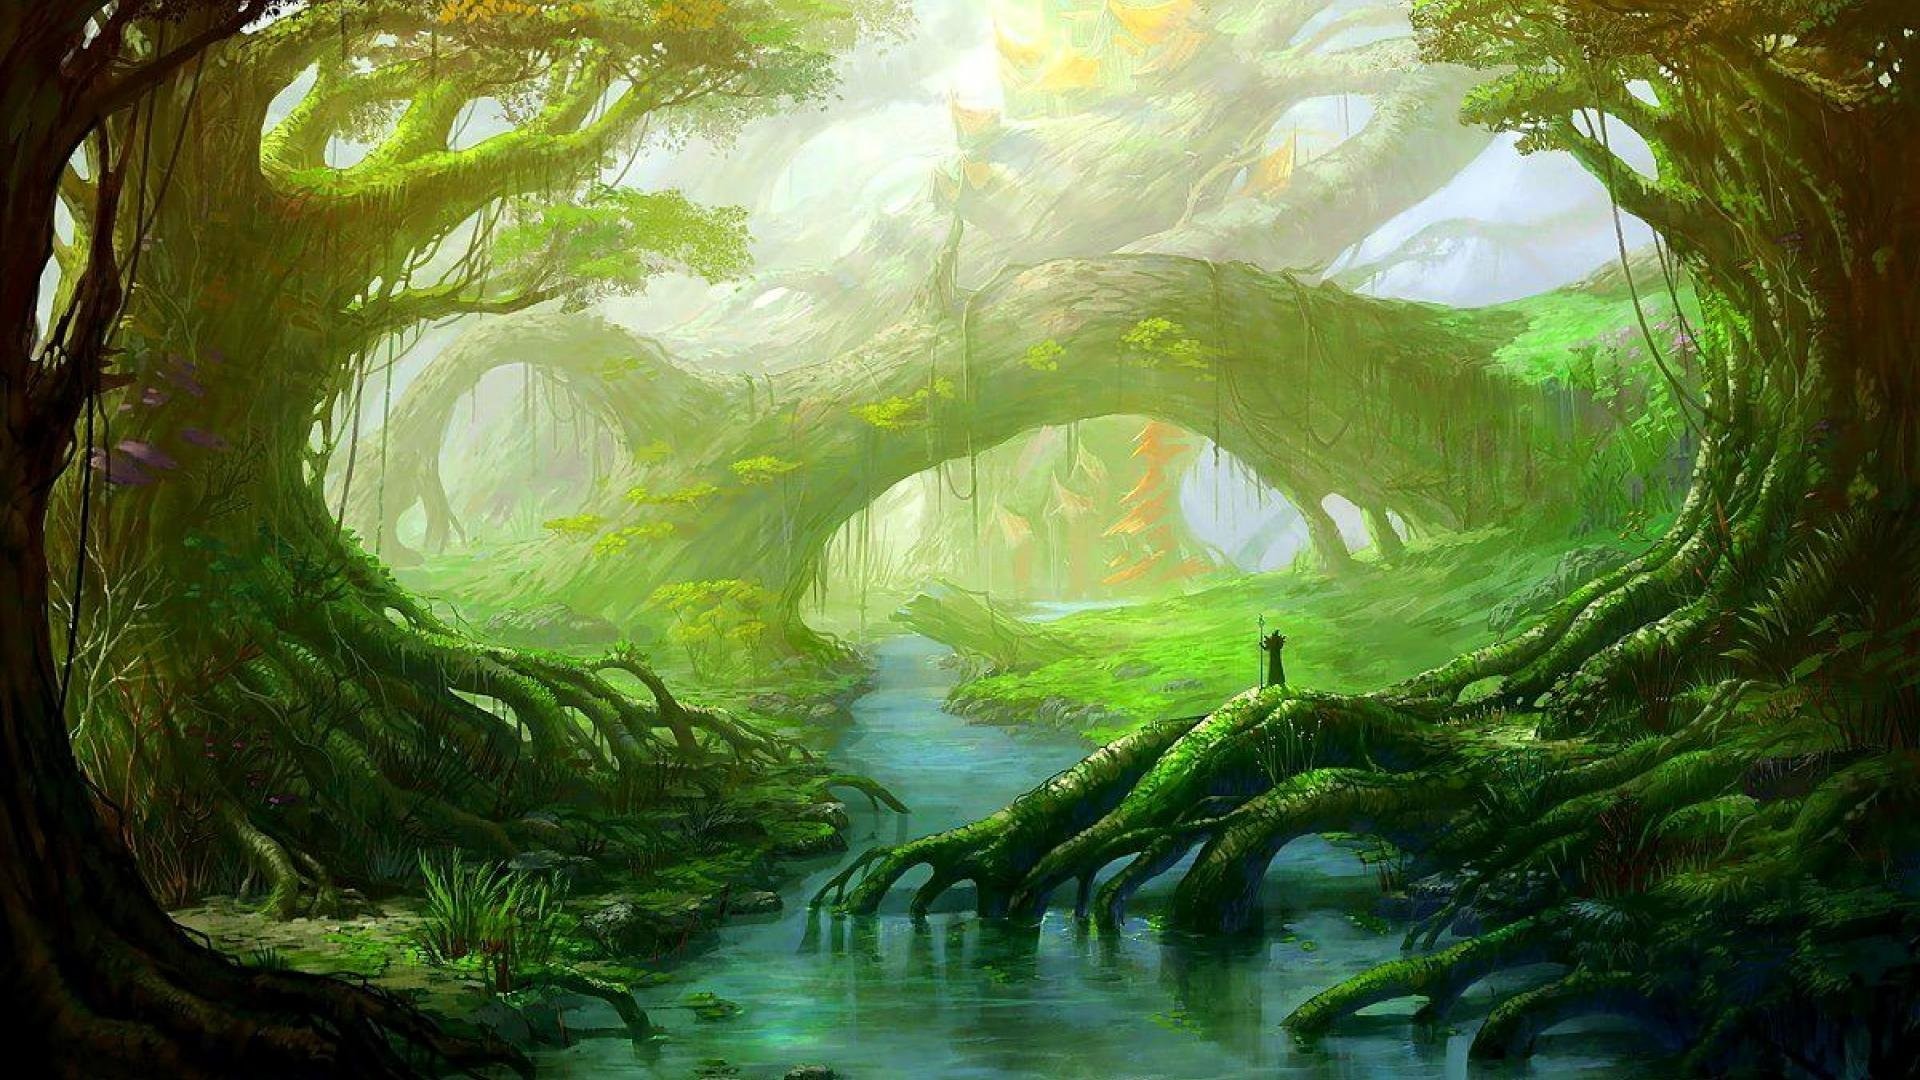 1920x1080 3840x2160 Wallpaper Hd Of Pin By Lotta Andersson On Cool Stuff Enchanted  Forest Mural High Quality Smartphone